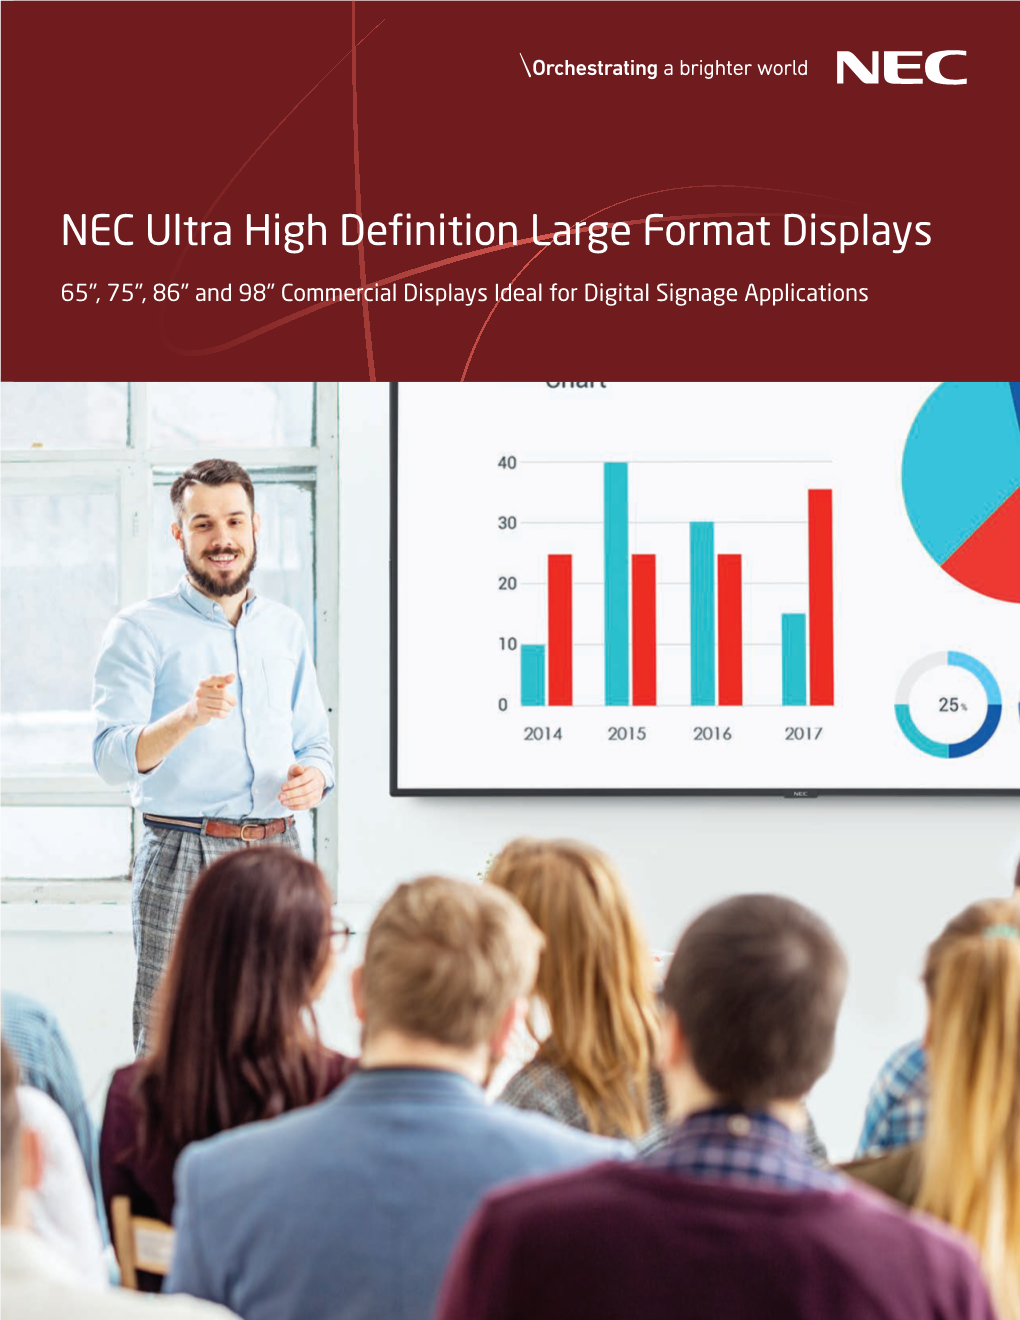 NEC Ultra High Definition Large Format Displays